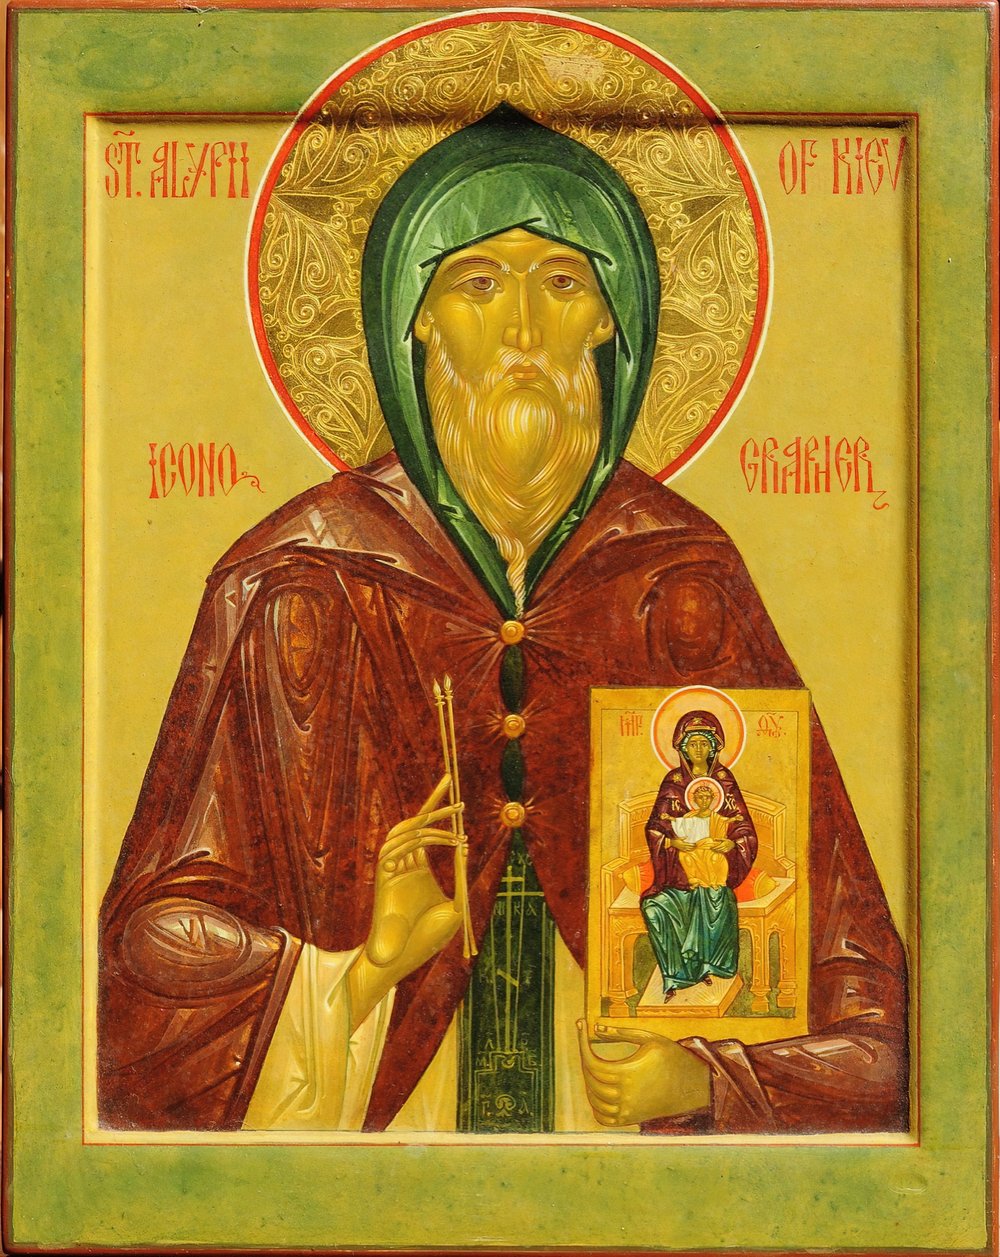 St Alypii of the Kiev Caves, Iconographer